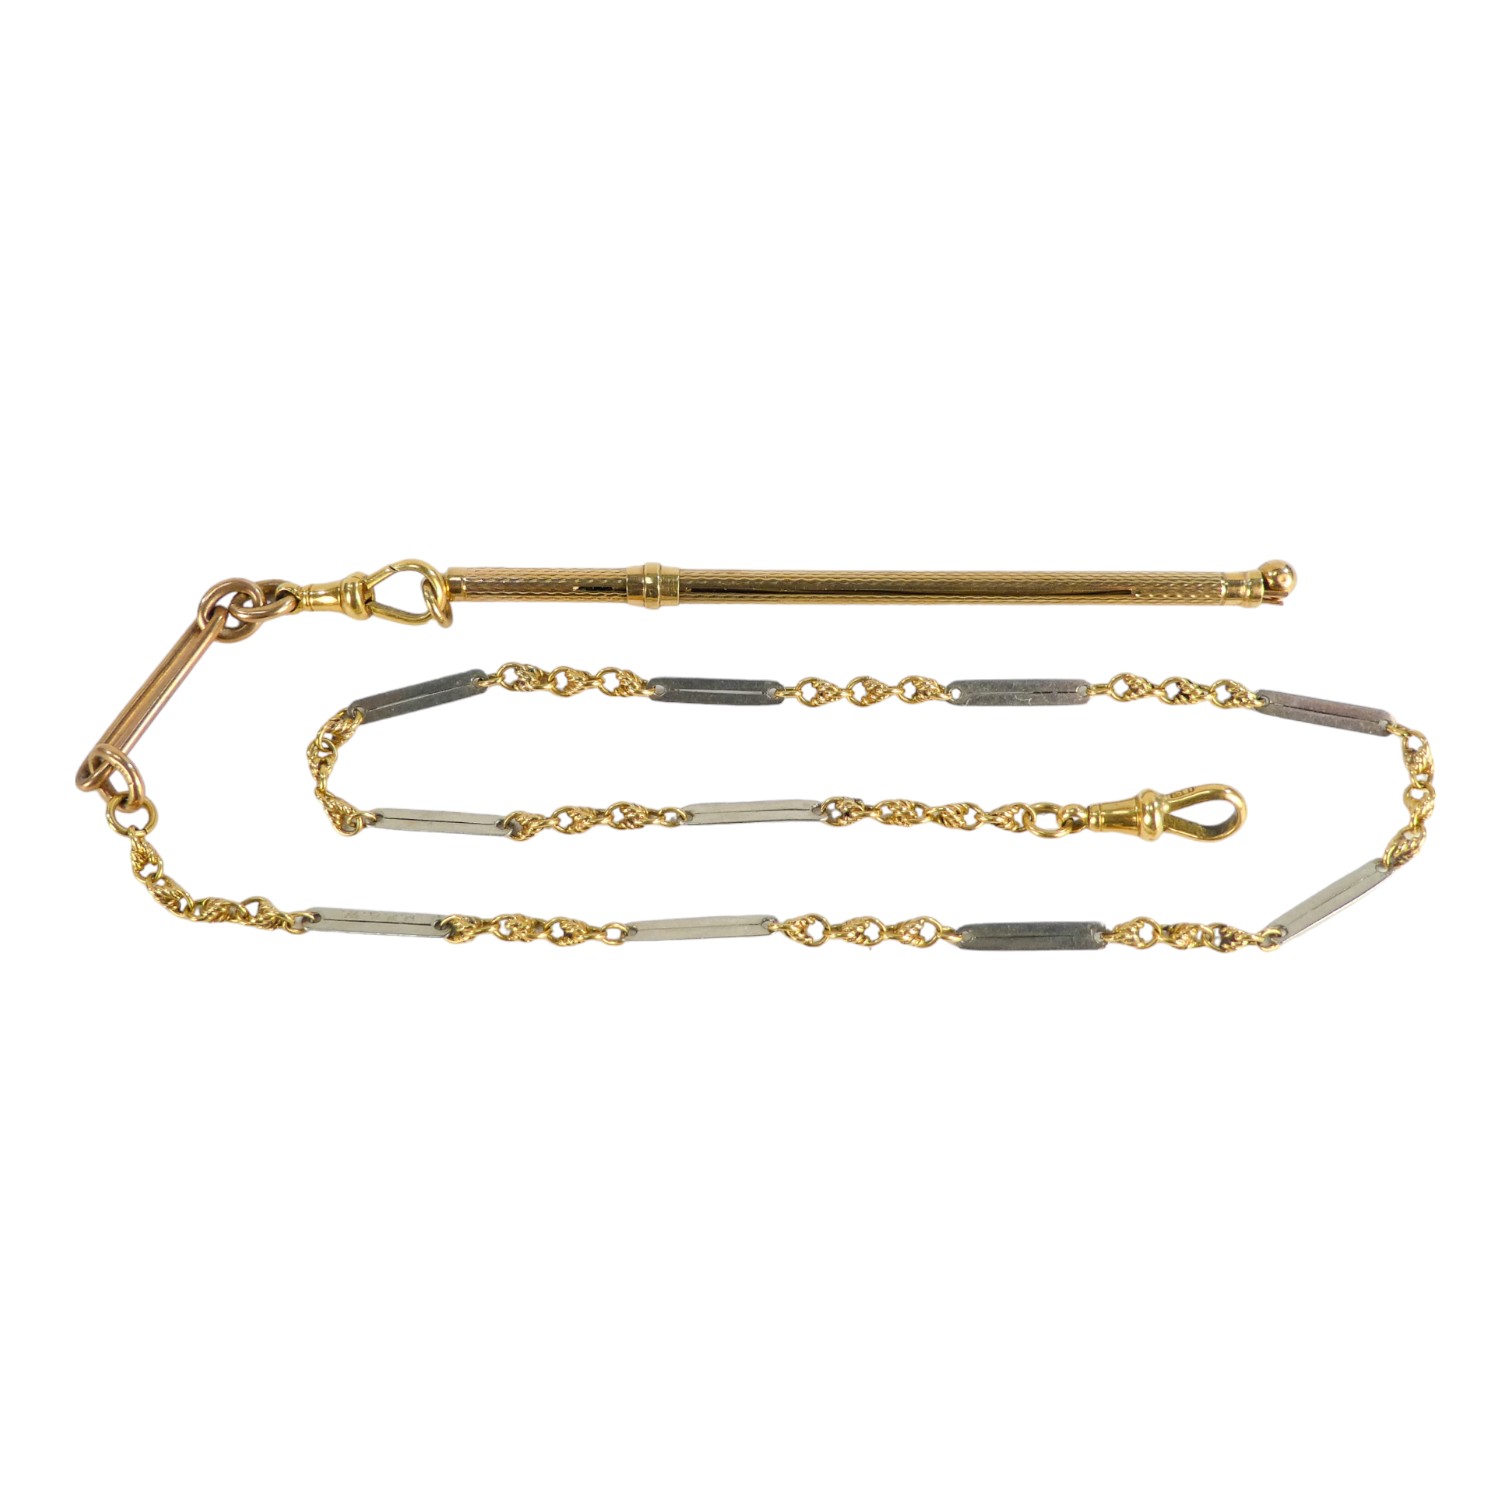 A 9ct gold swizzle stick - engine turned, on a gilt metal chain with 18ct gold clasps, weight 18g.